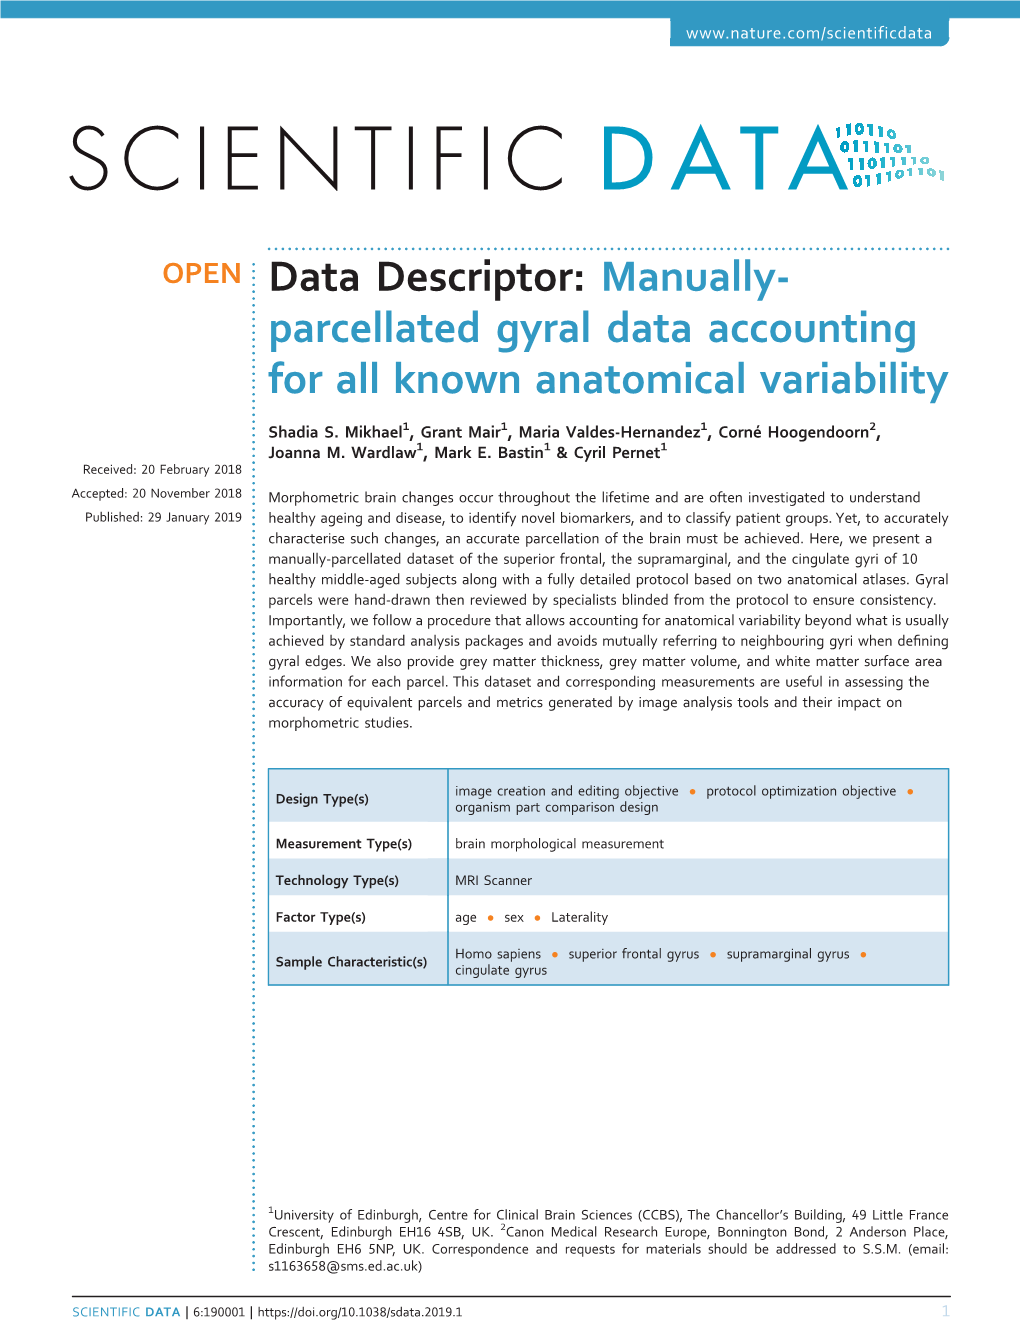 Manually-Parcellated Gyral Data Accounting for All Known Anatomical Variability